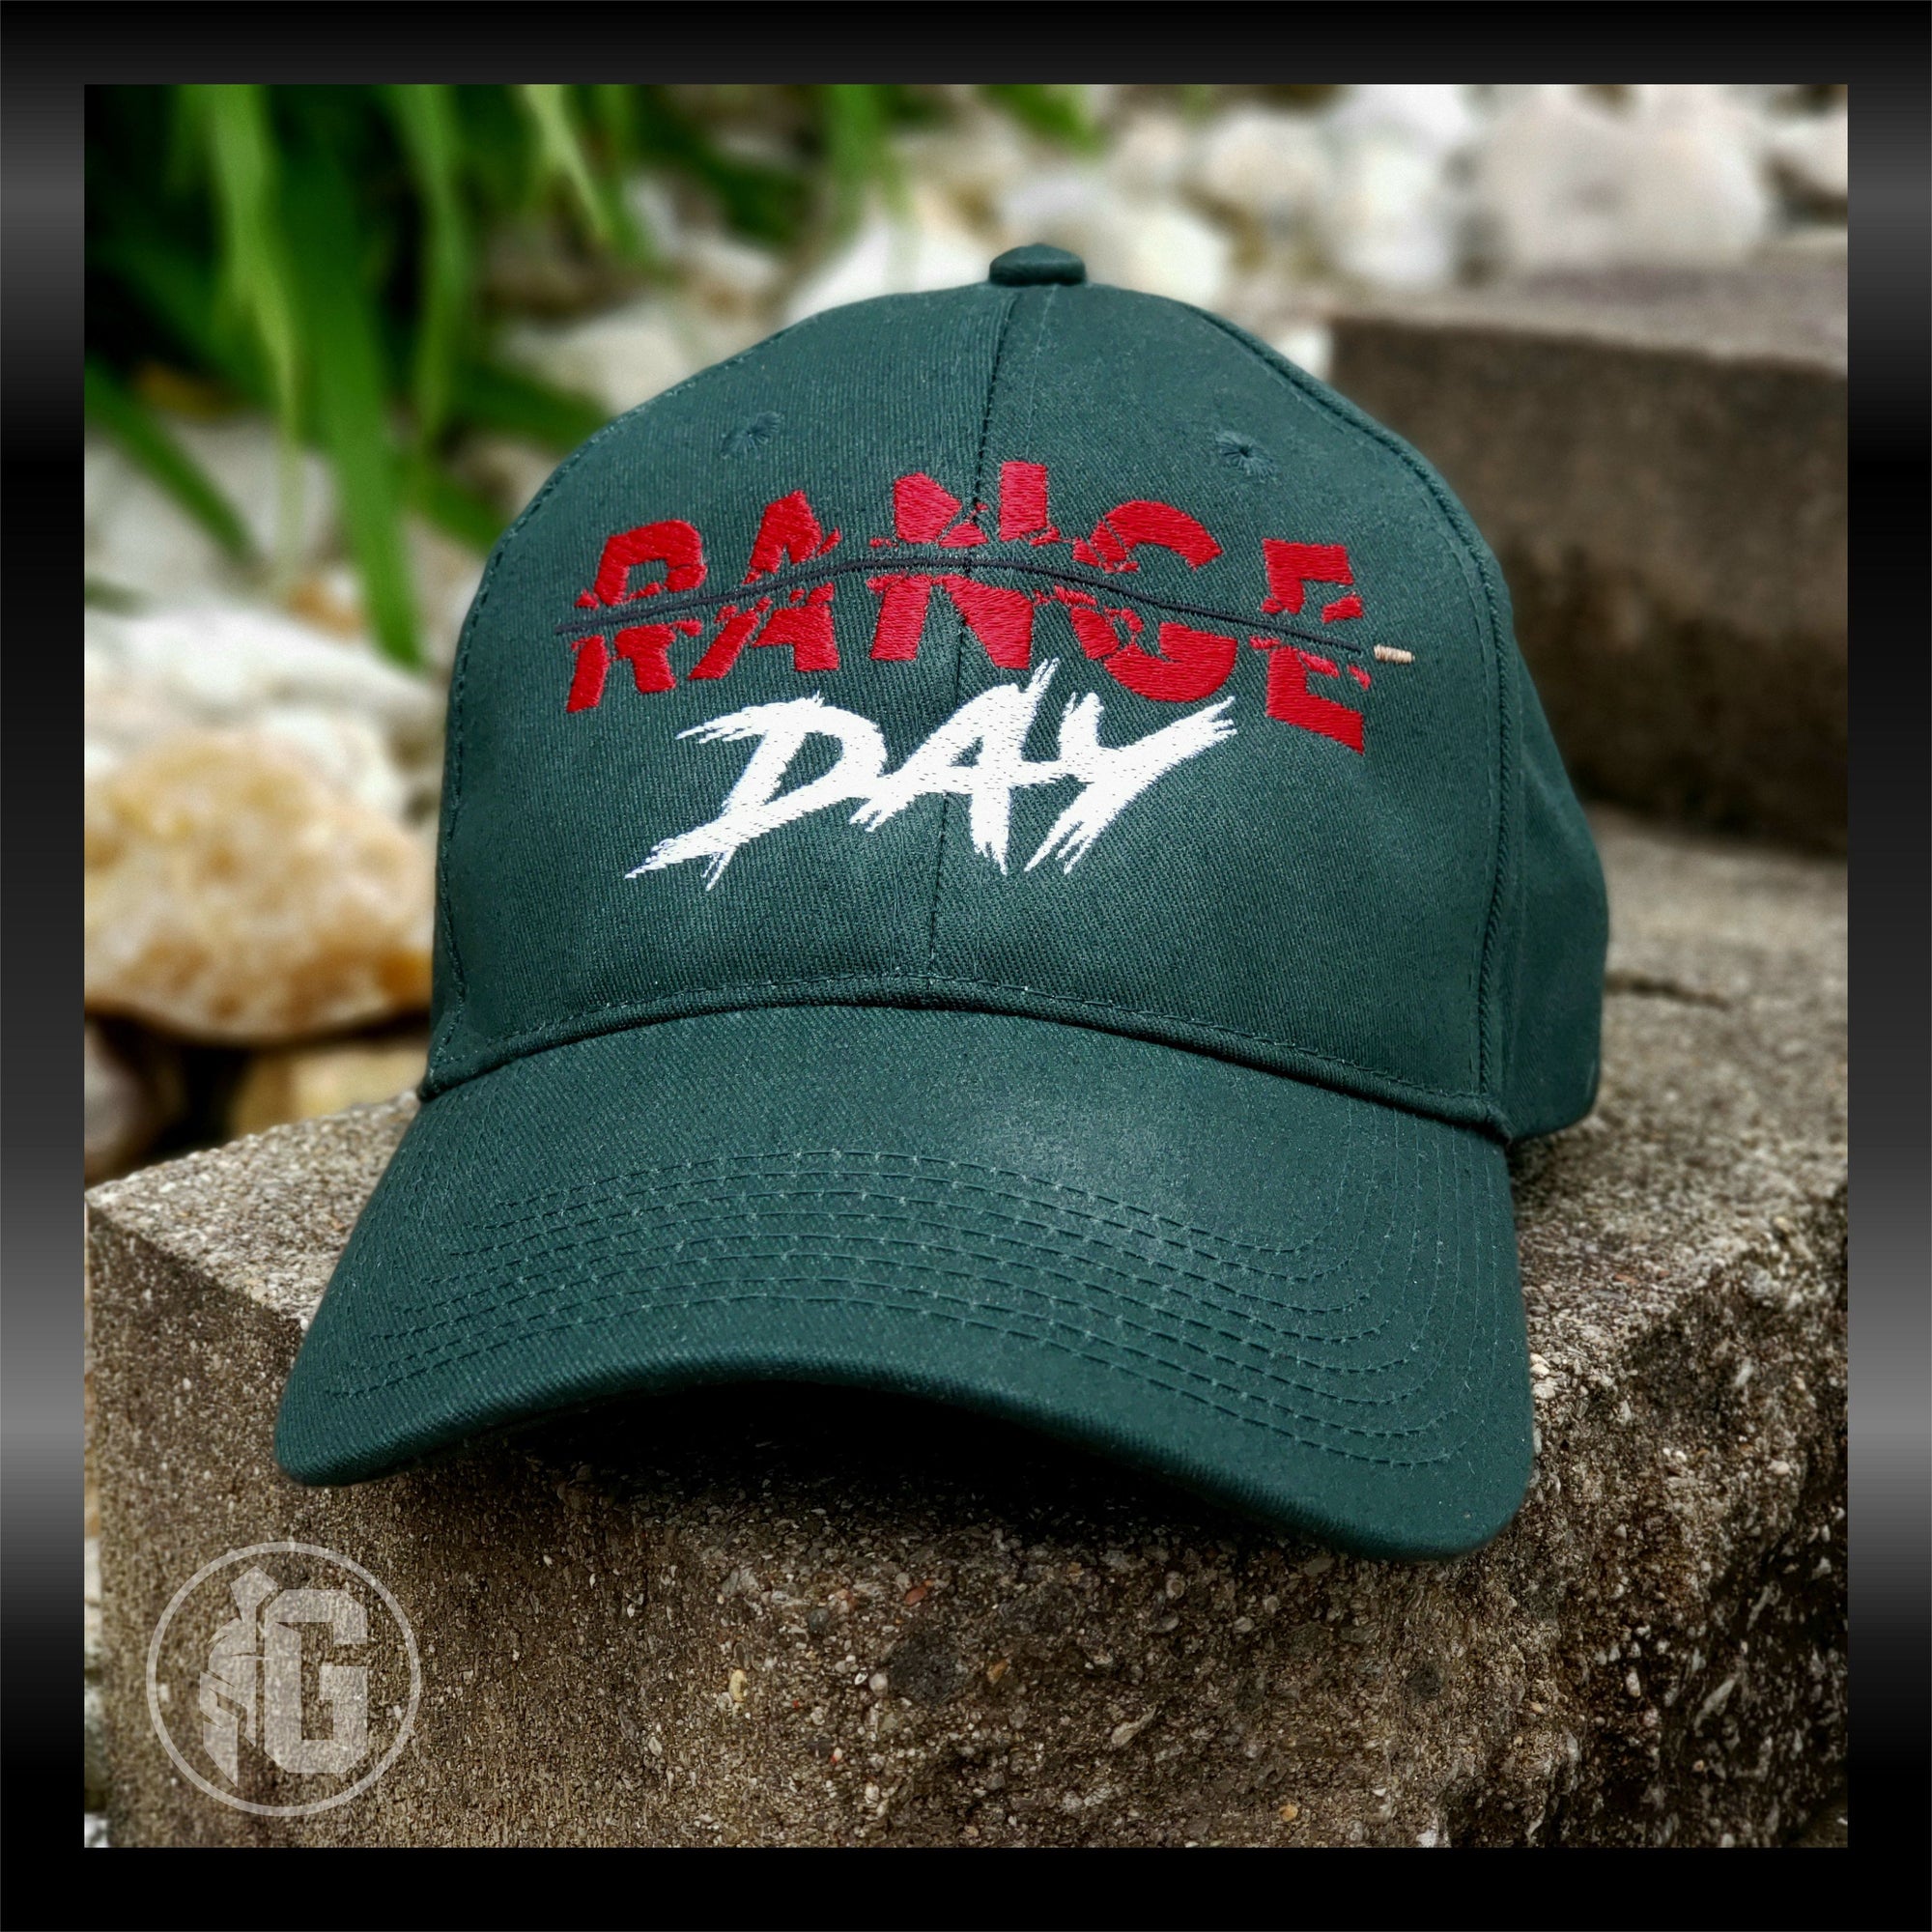 Range Day Embroidered Hat | Grit Gear Apparel®